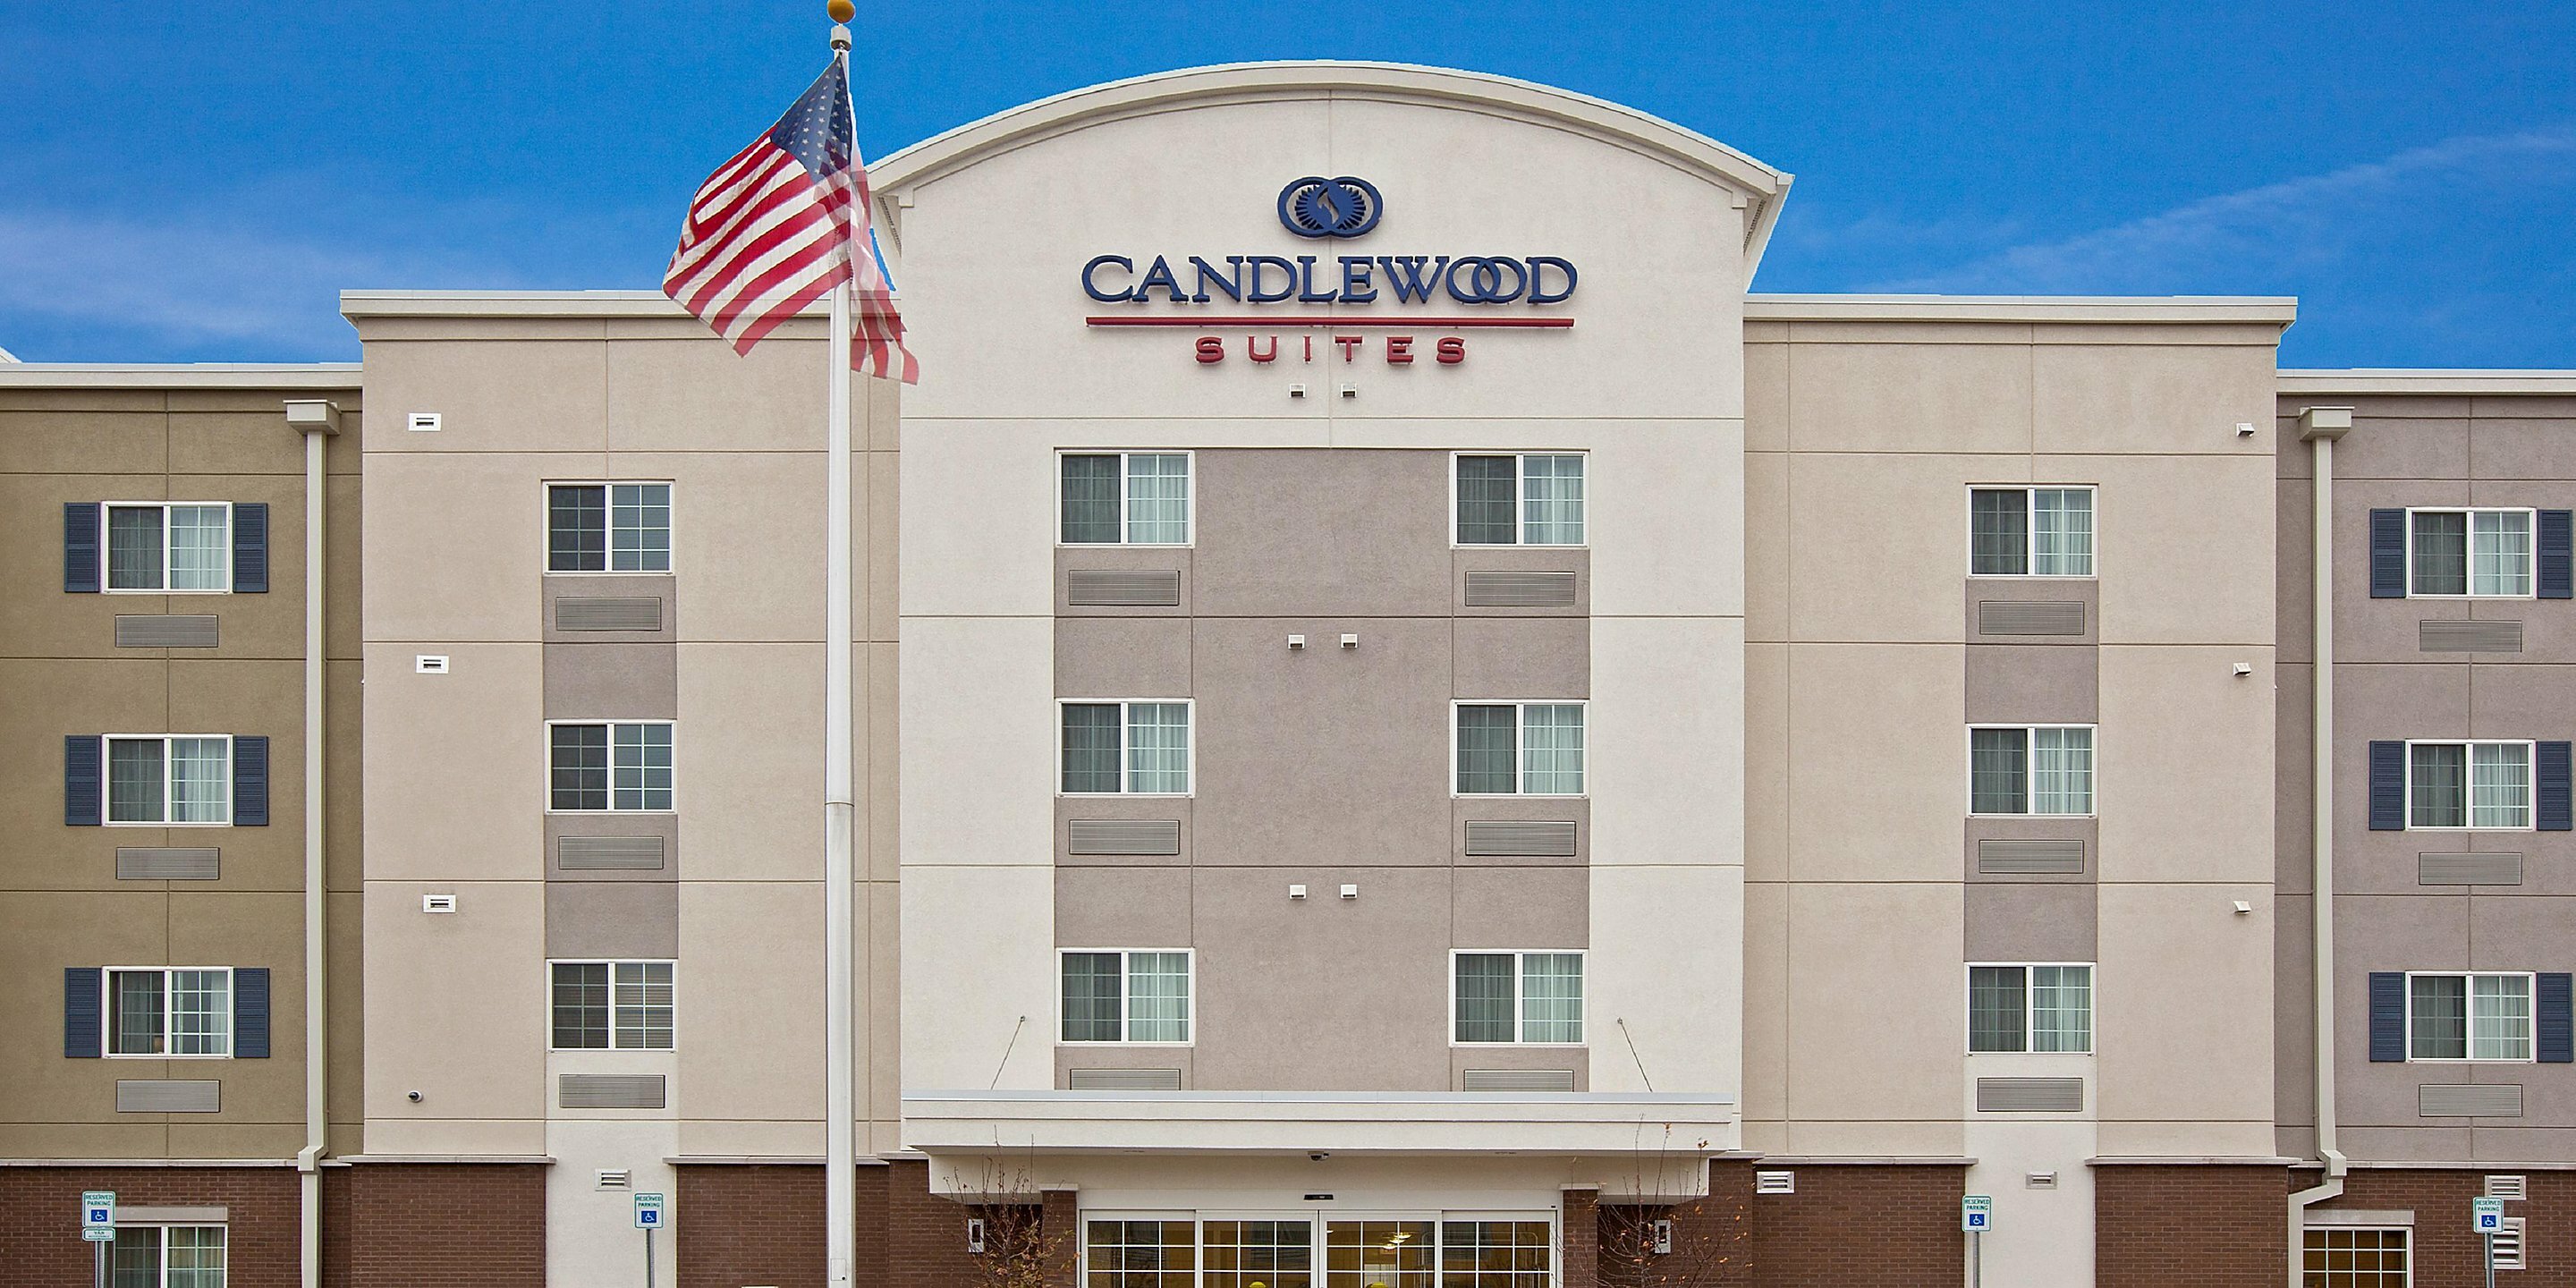 Photo of Candlewood Suites Indianapolis East, Indianapolis, IN